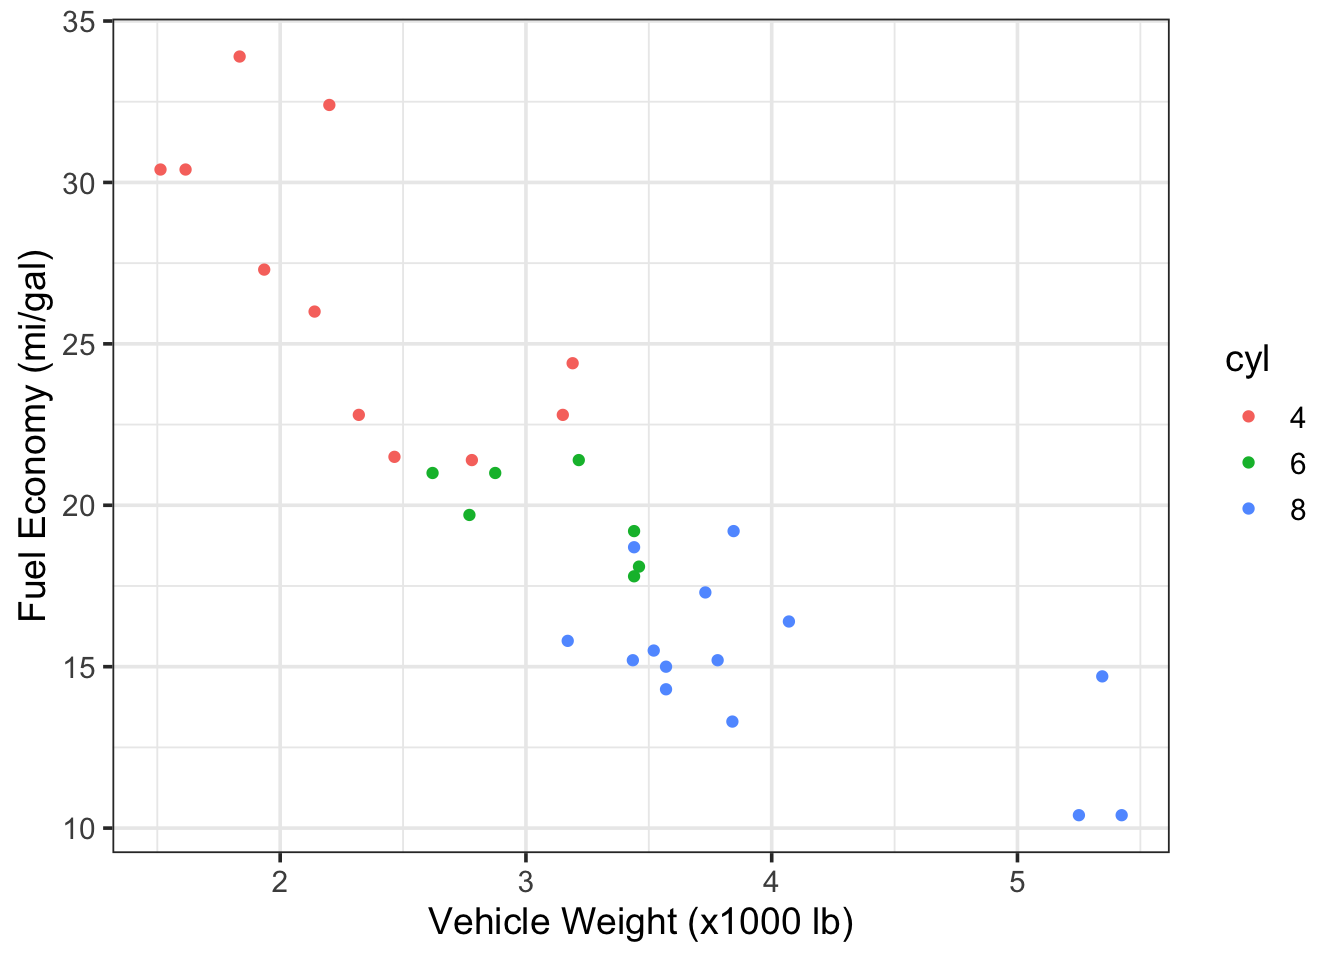 Vehicle fuel economy vs. weight and colored by number of engine cylinders (data from mtcars)